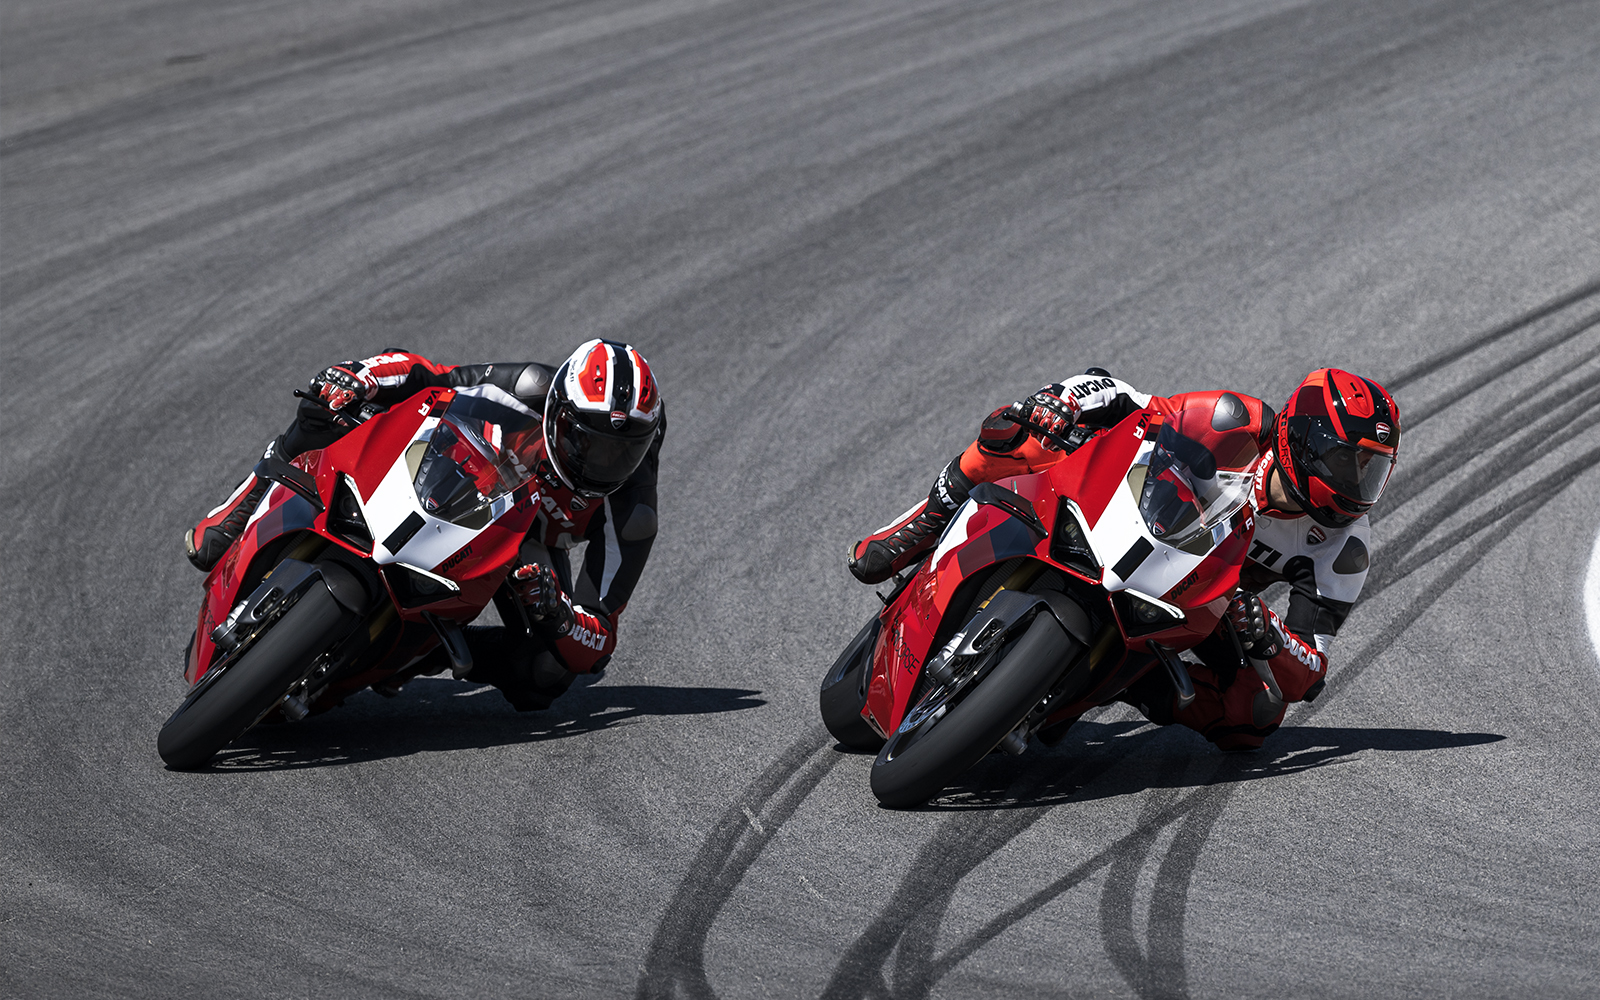 New Panigale V4 R Ducati - This is Racing